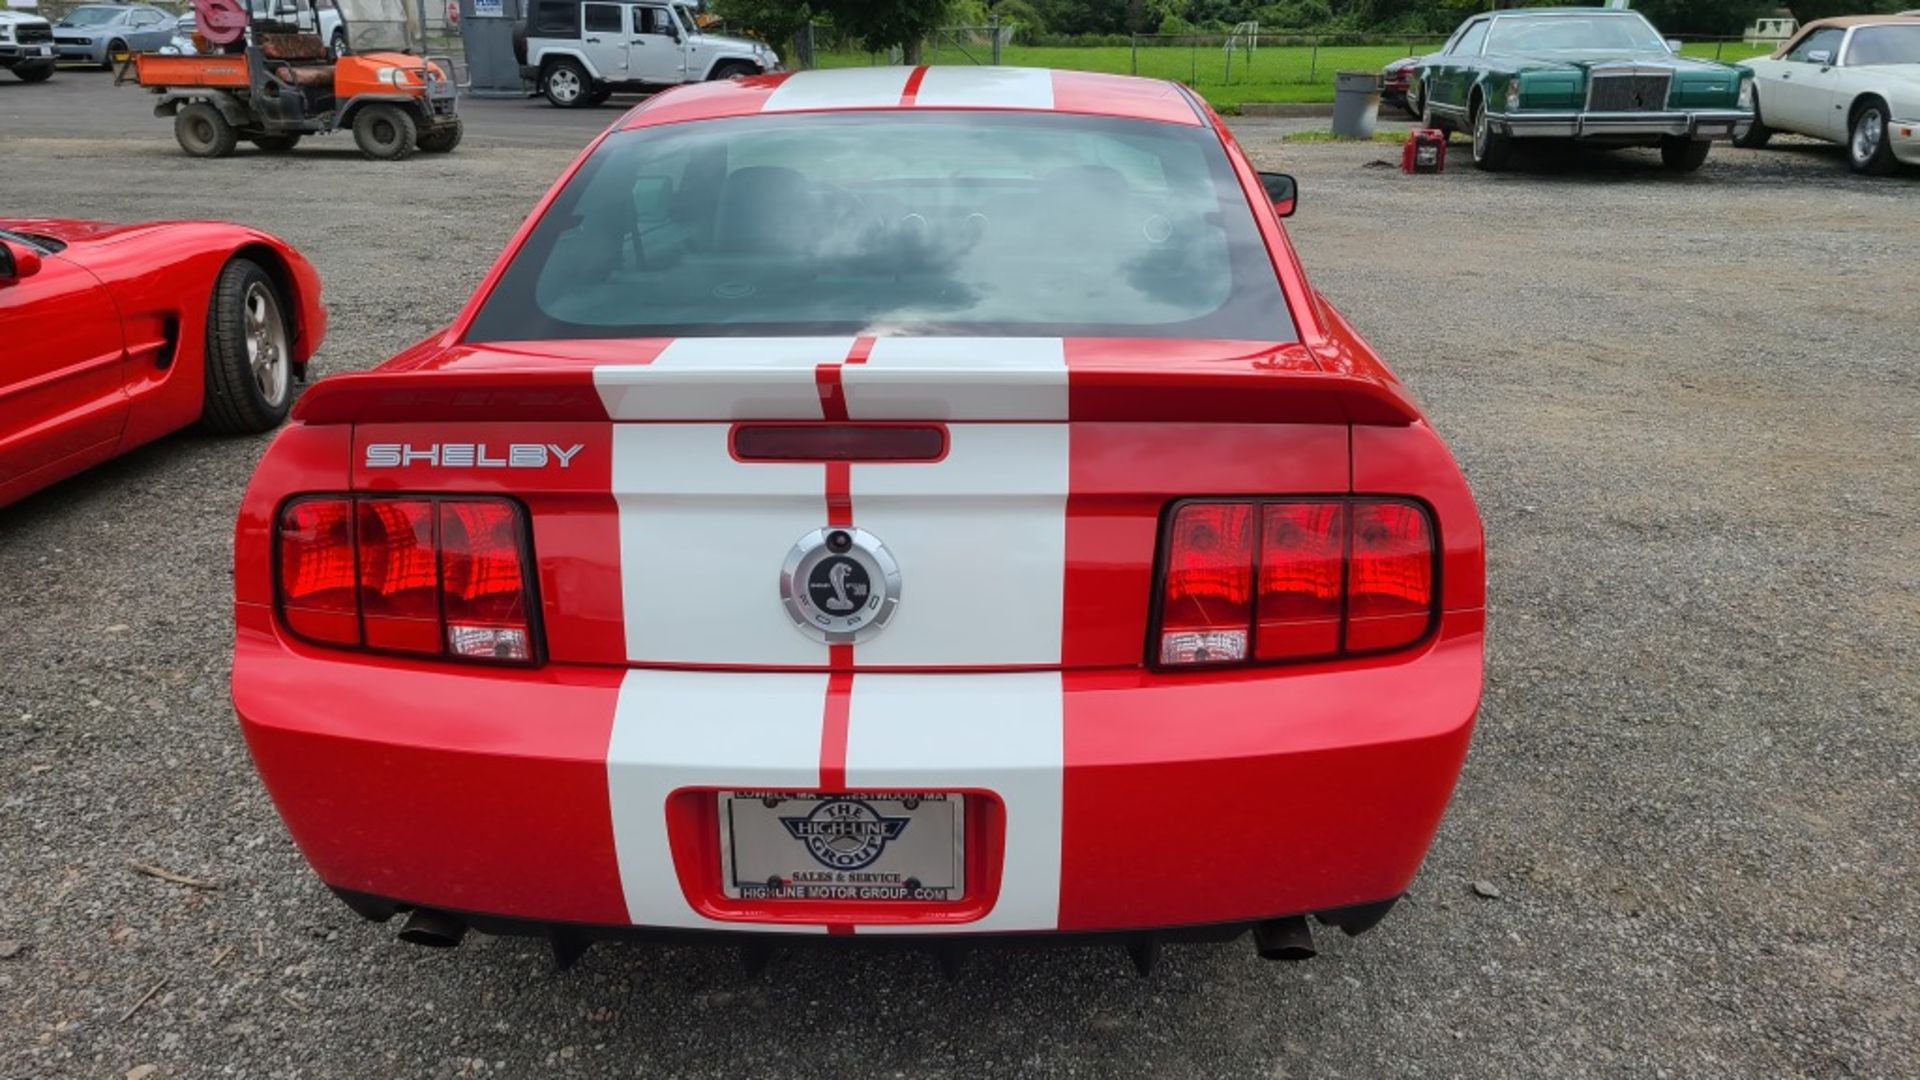 2007 Ford Mustang Shelby Gt500 - Image 5 of 13